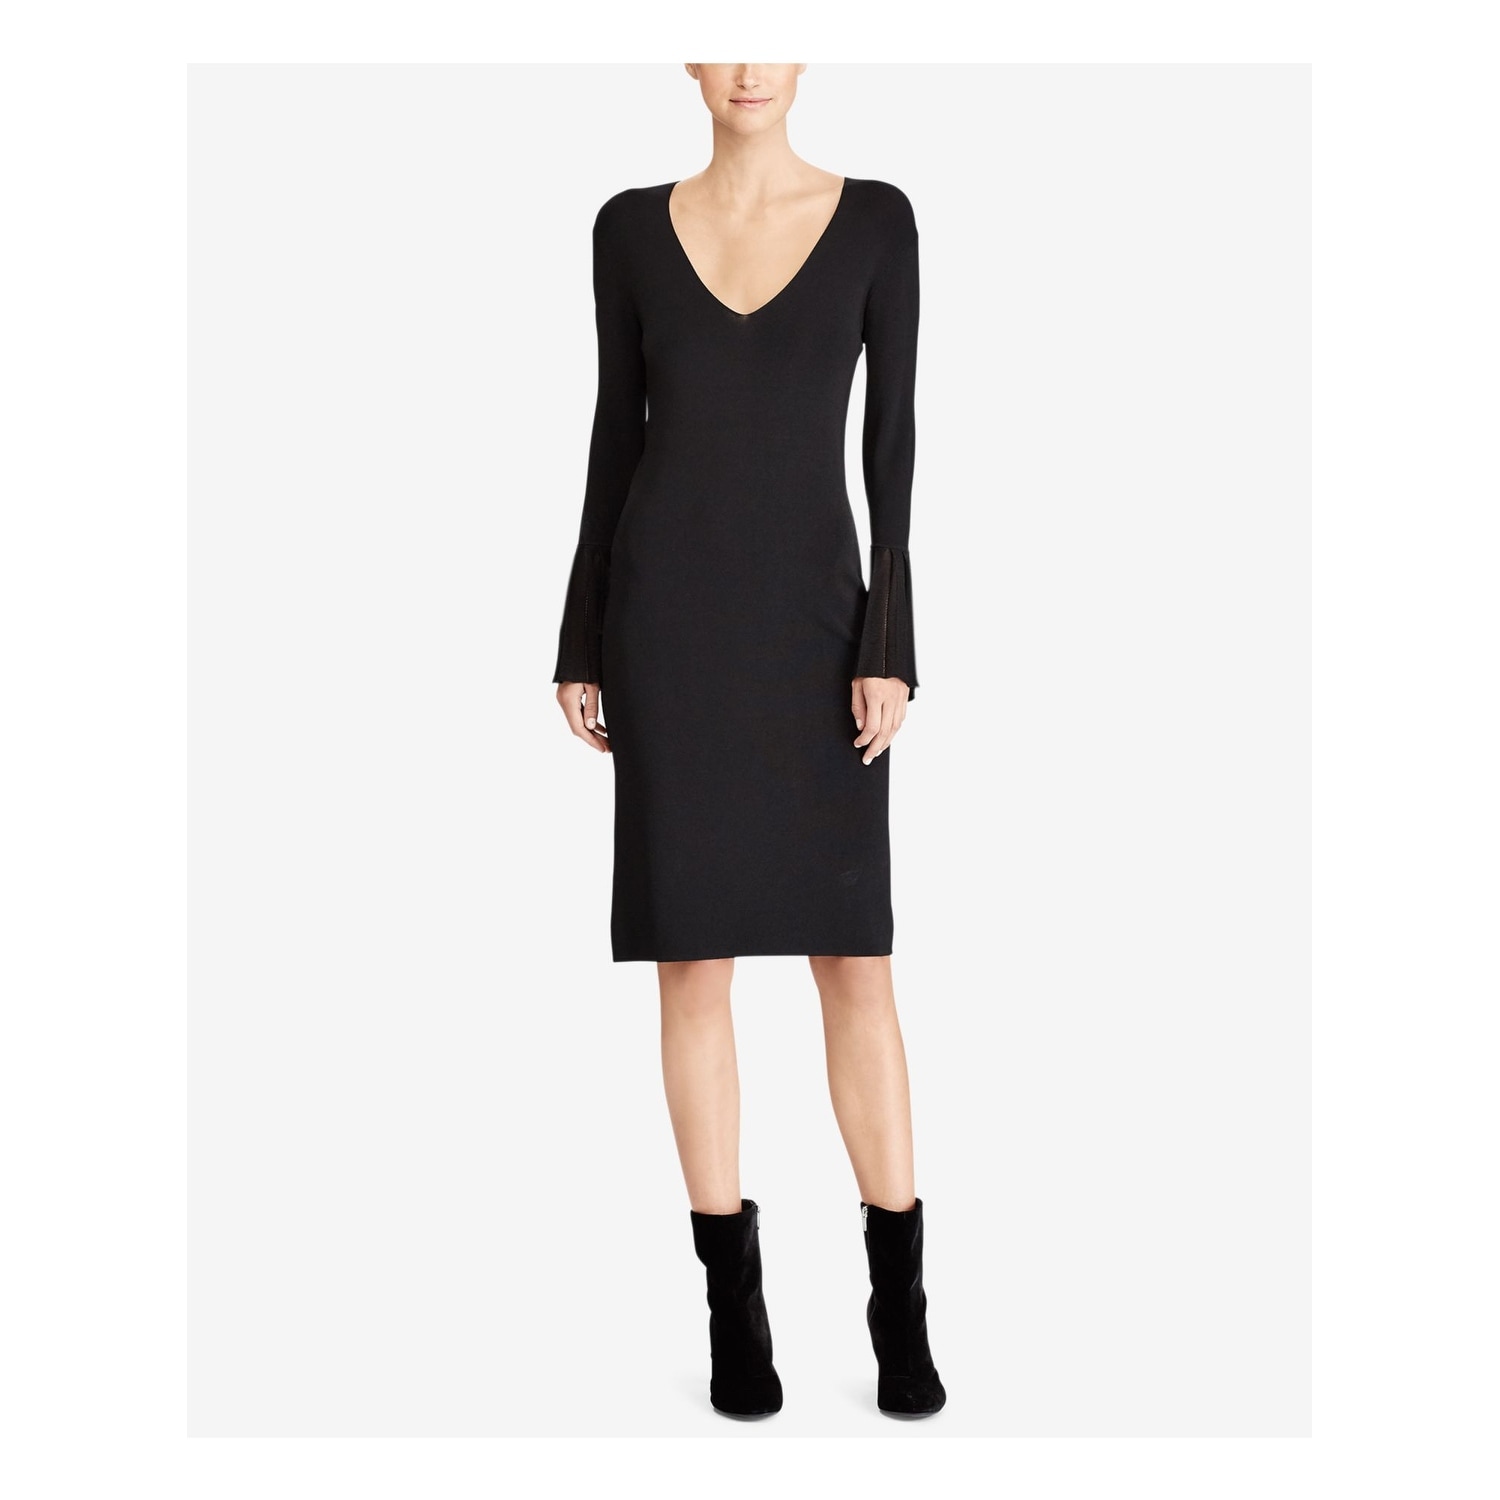 women's fit and flare cocktail dress